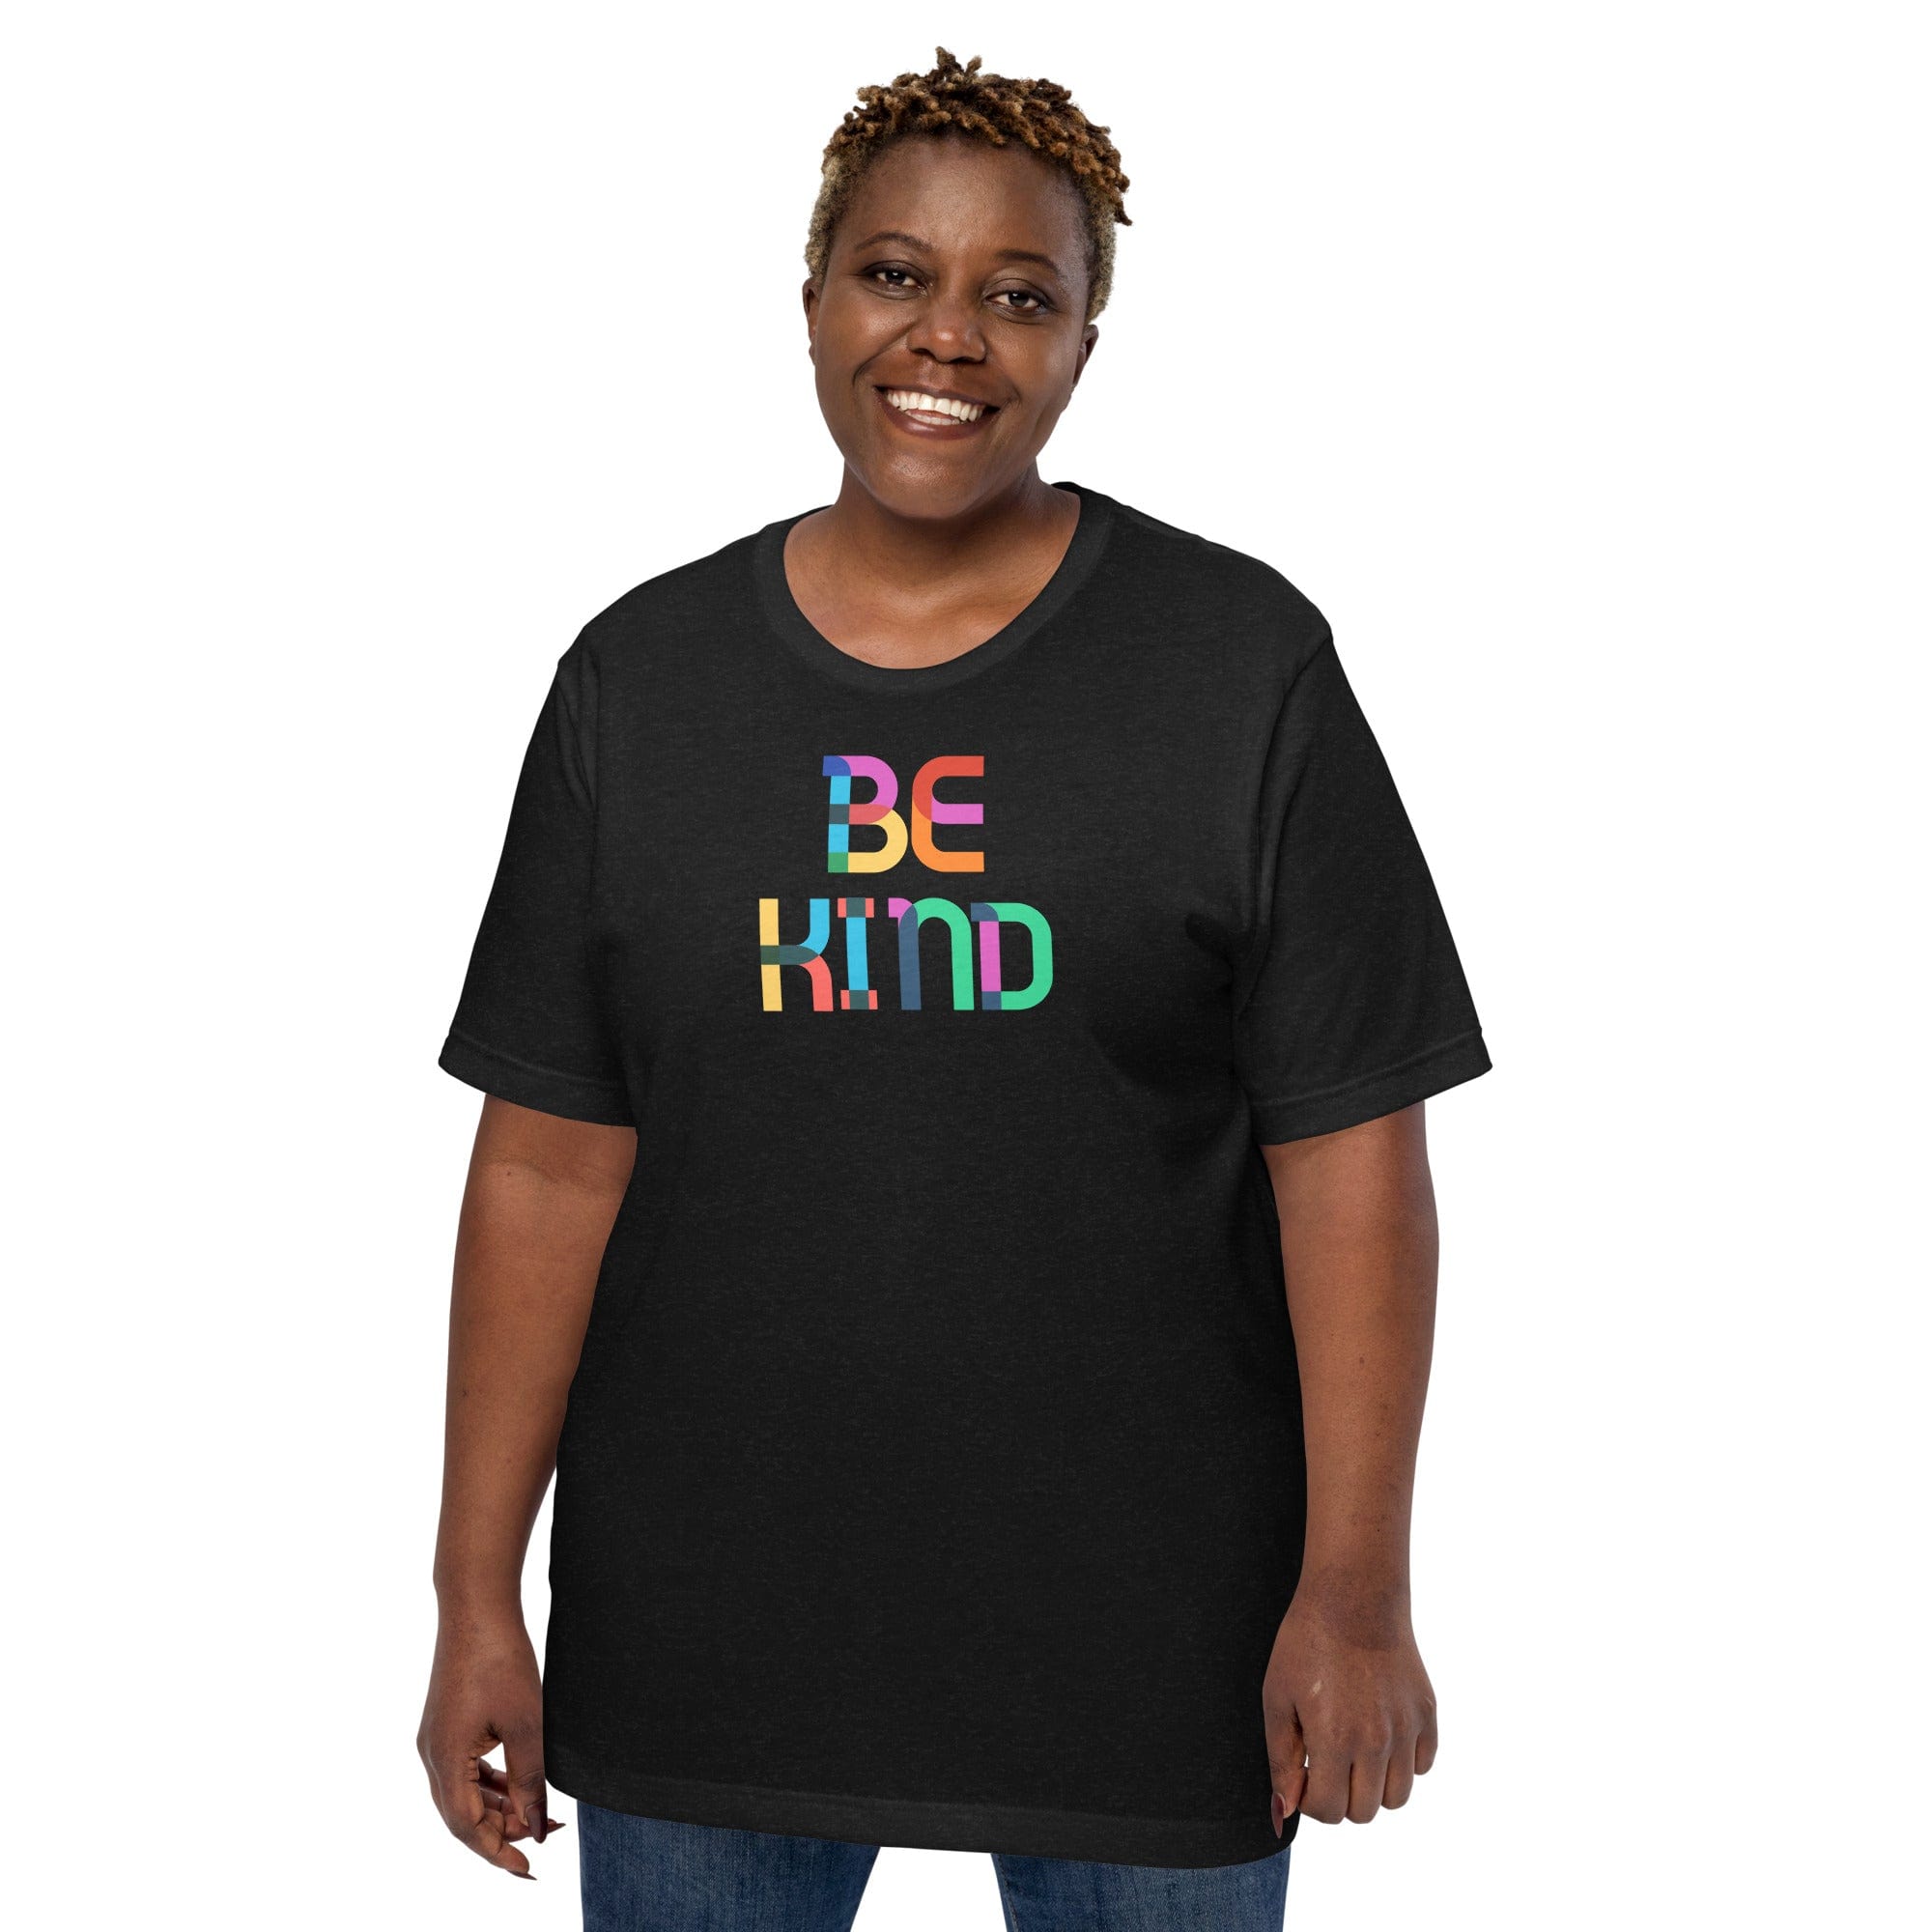 Spruced Roost Black Heather / XS Be Kind Women's Basic Organic Cotton T-shirt - S-4XL